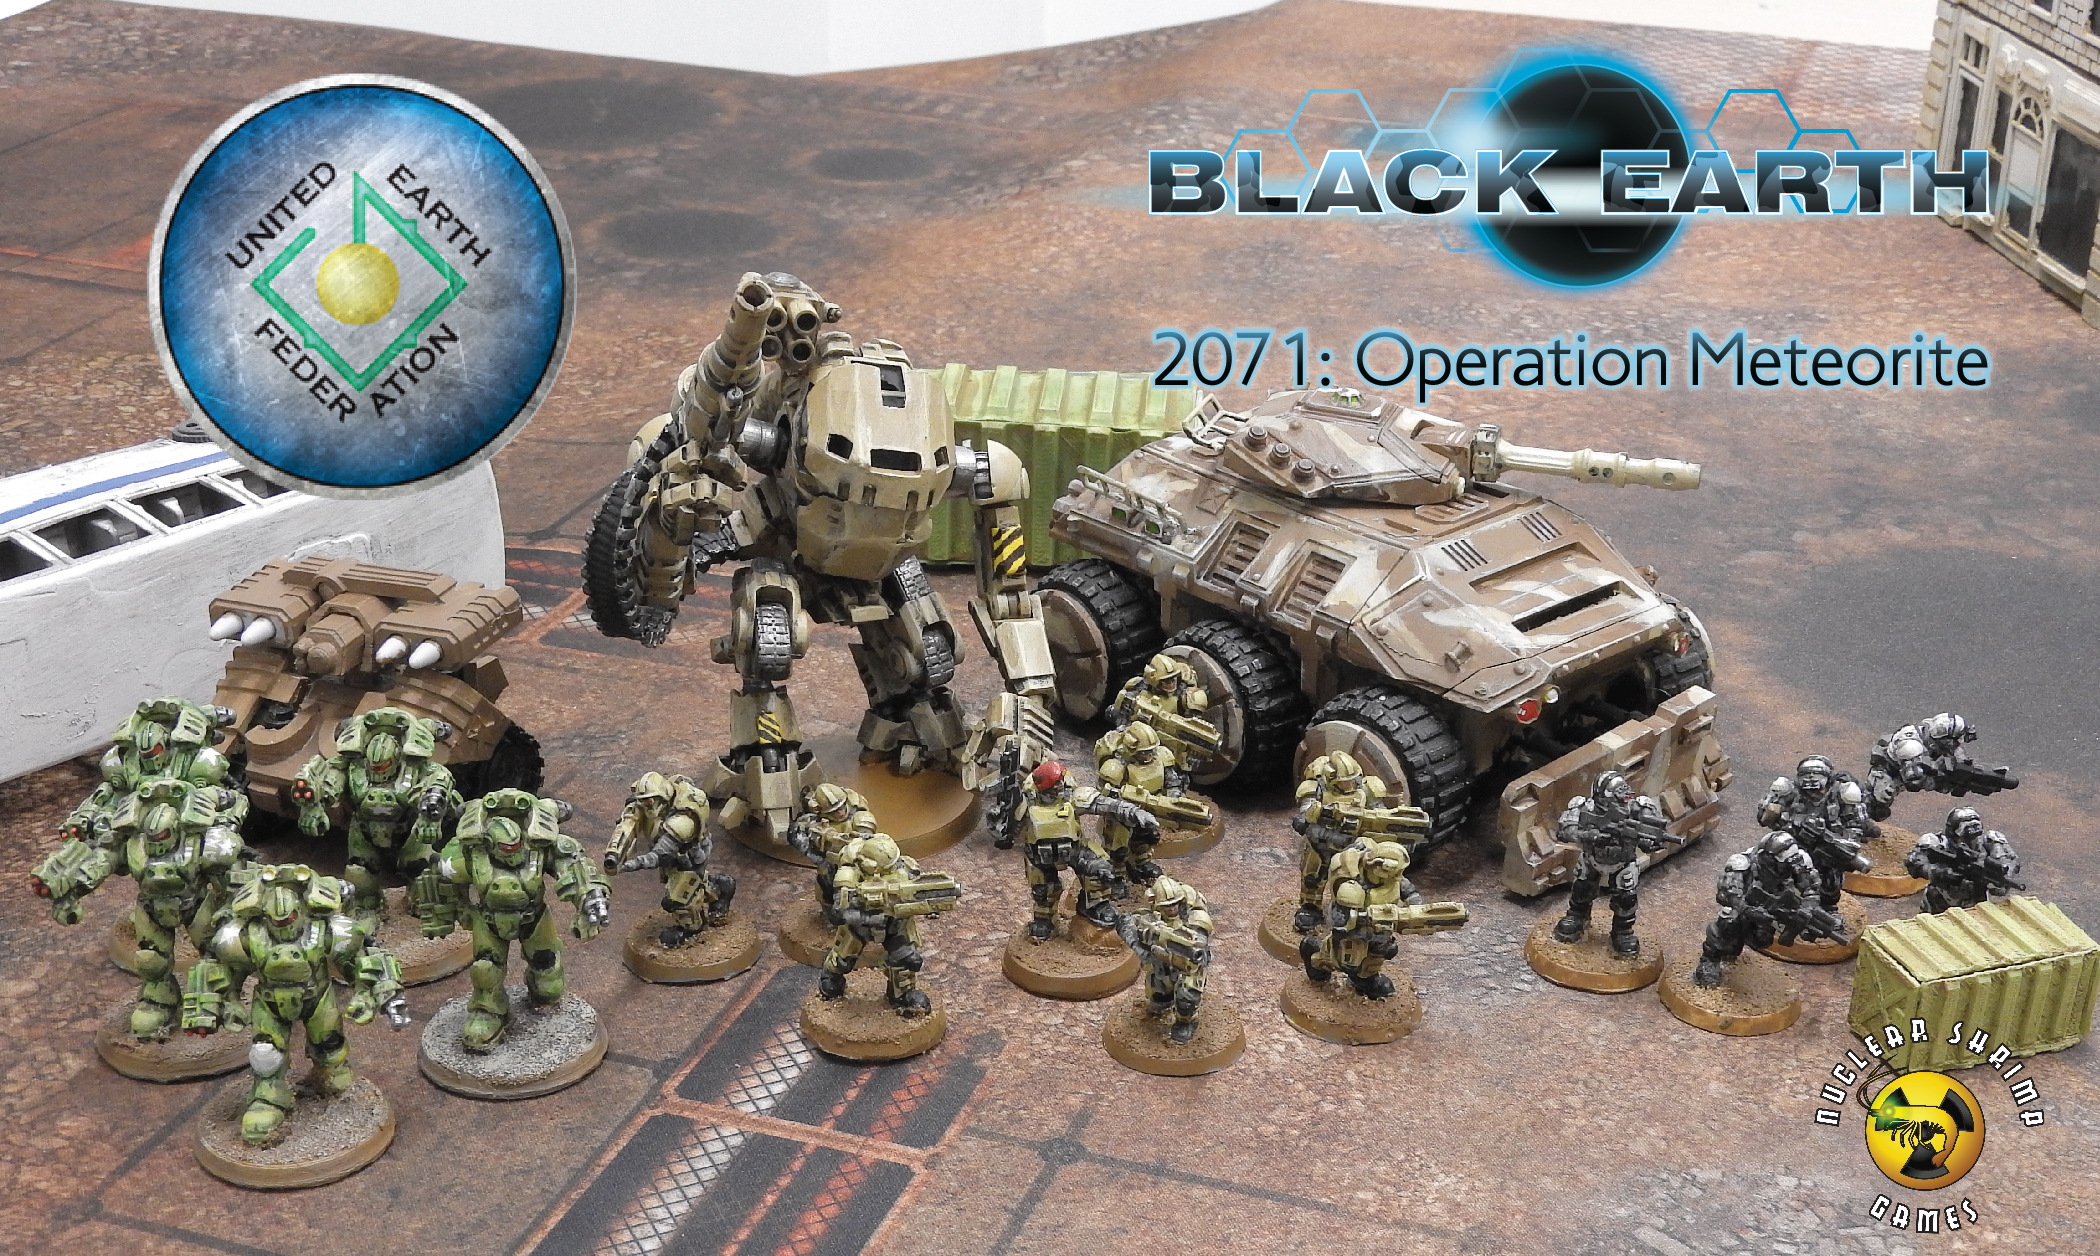 Black Earth – New sci-fi 28mm wargame coming in February